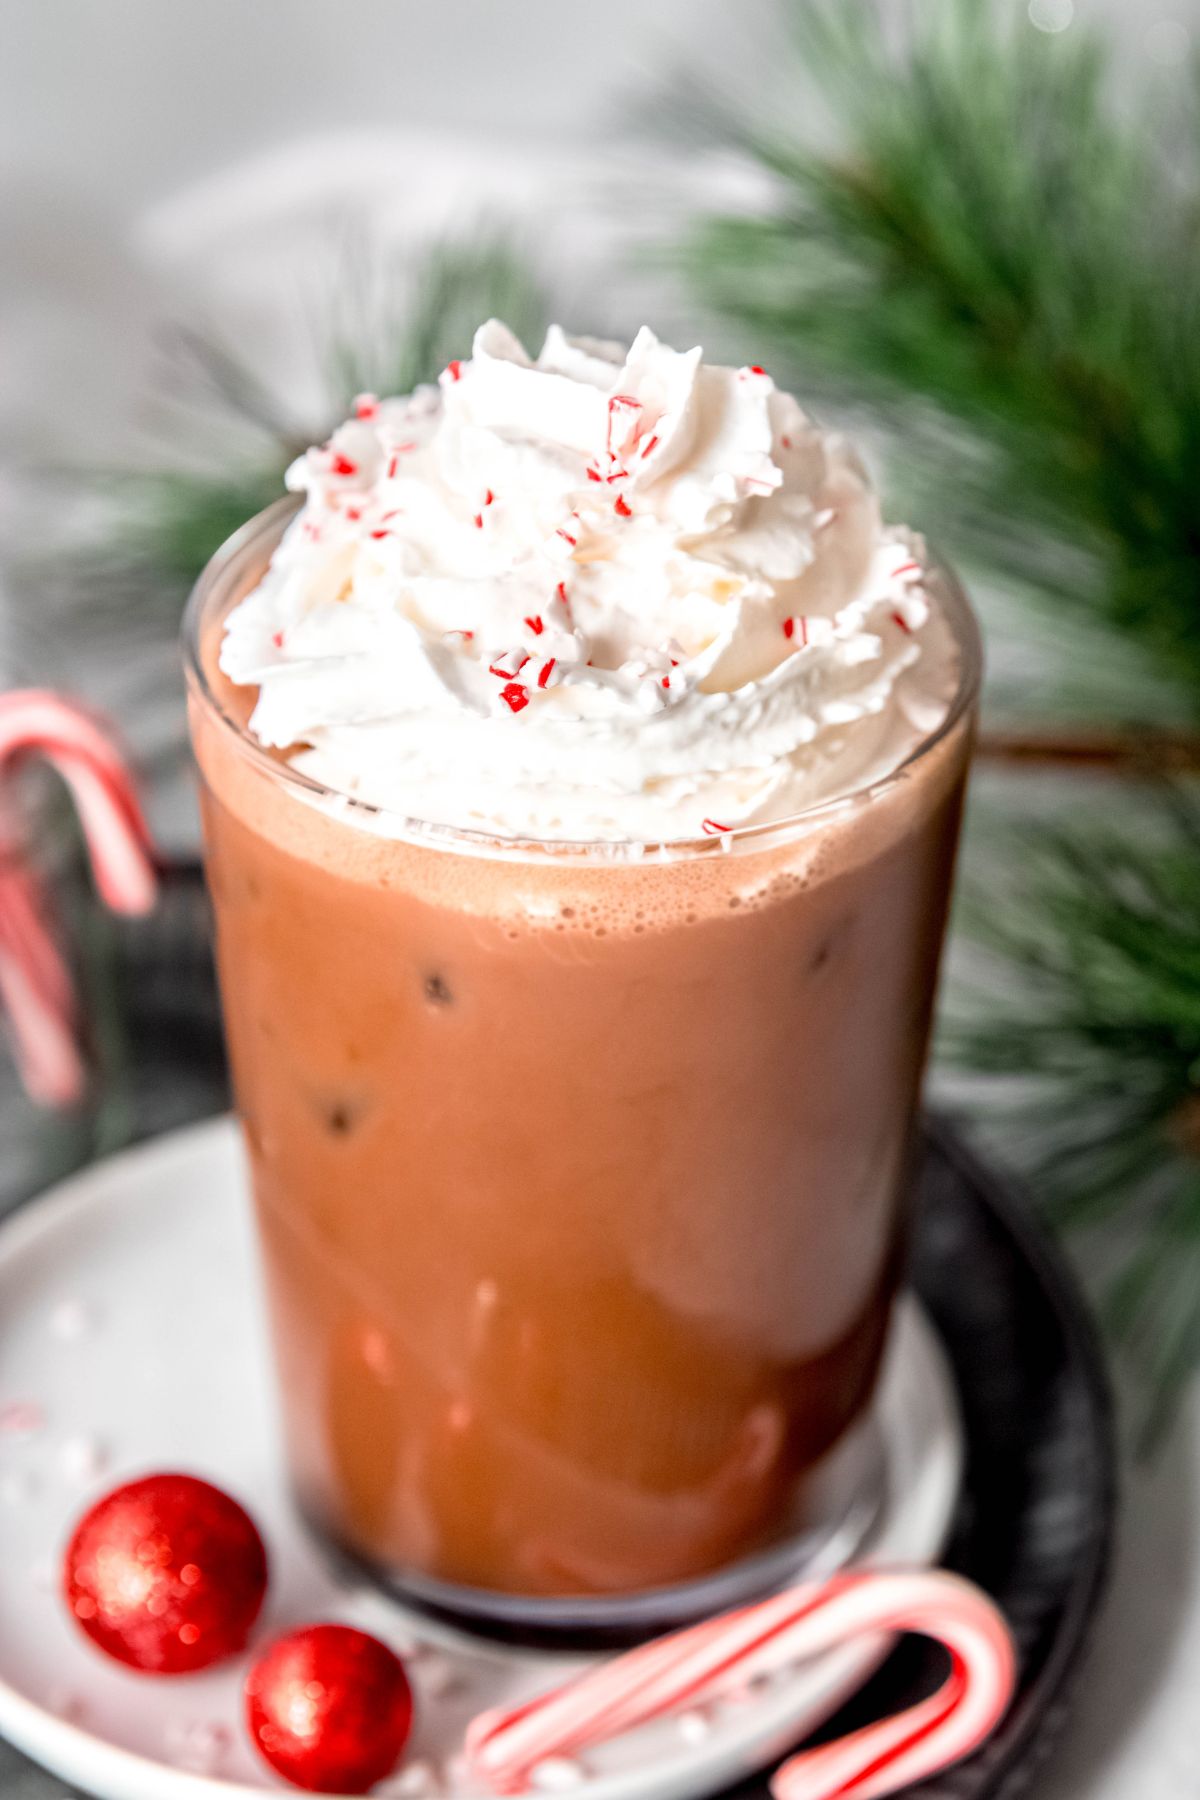 45 degree angle shot of a clear glass with an iced peppermint mocha topped with whipped cream and crushed candy canes.